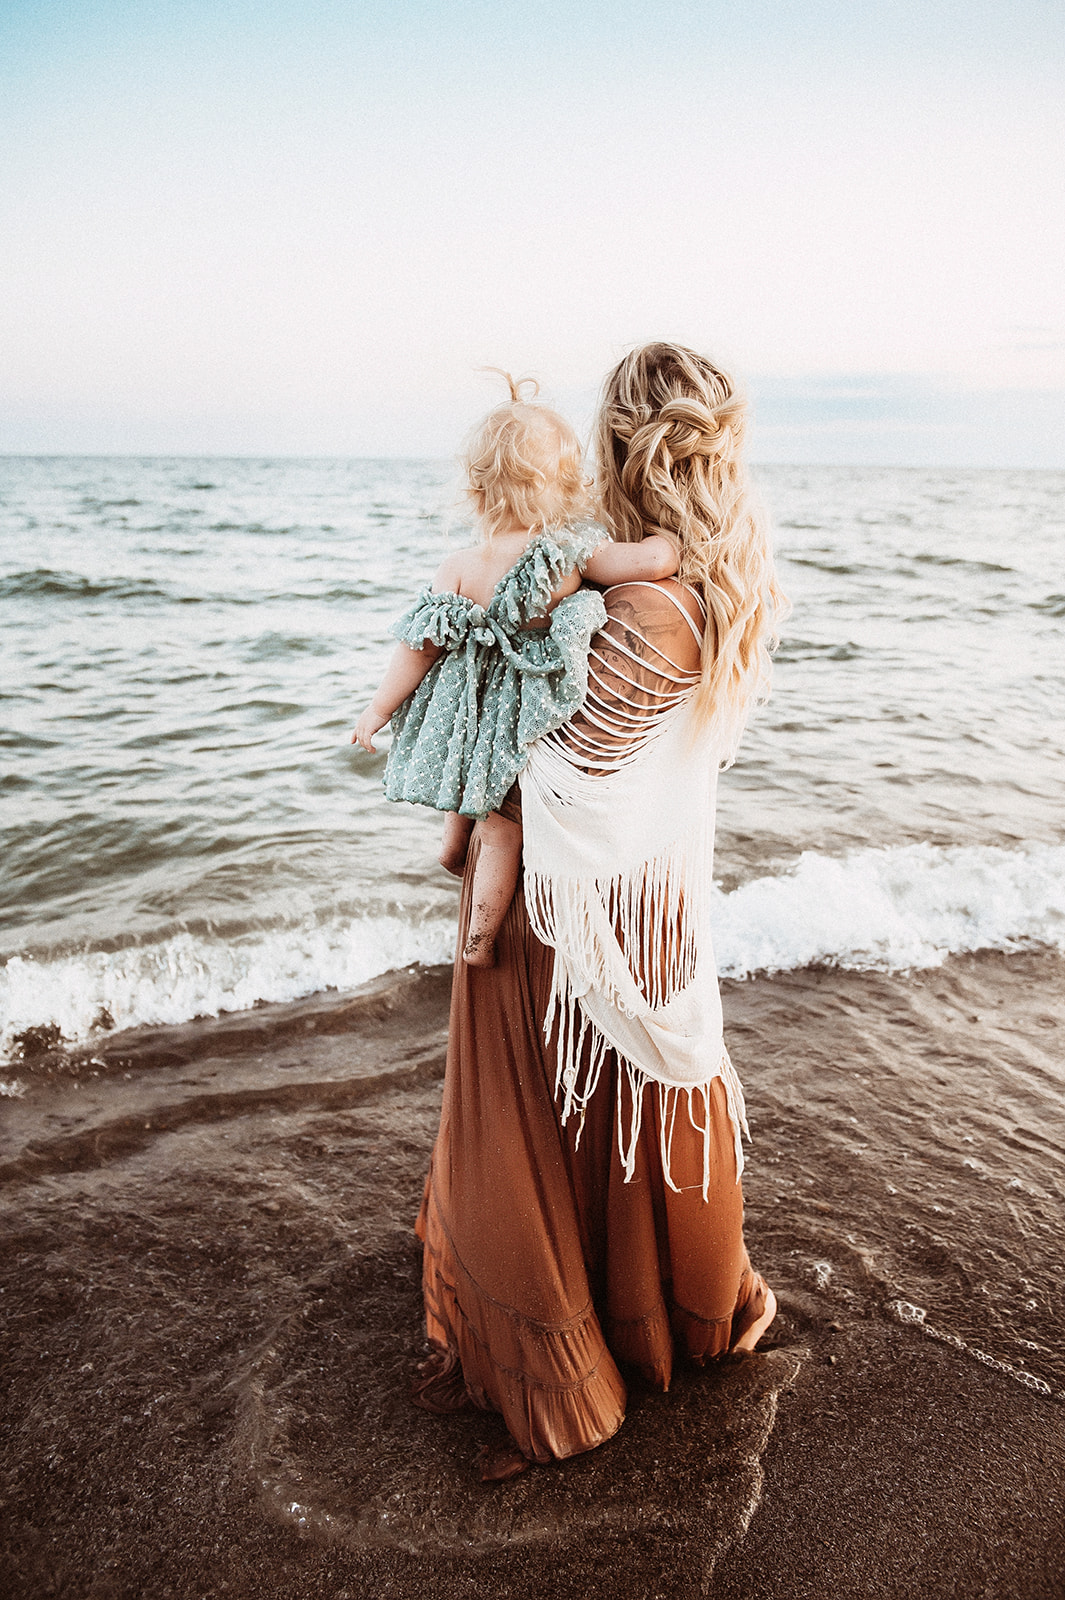 Perfect outfits for a summer beach photography session